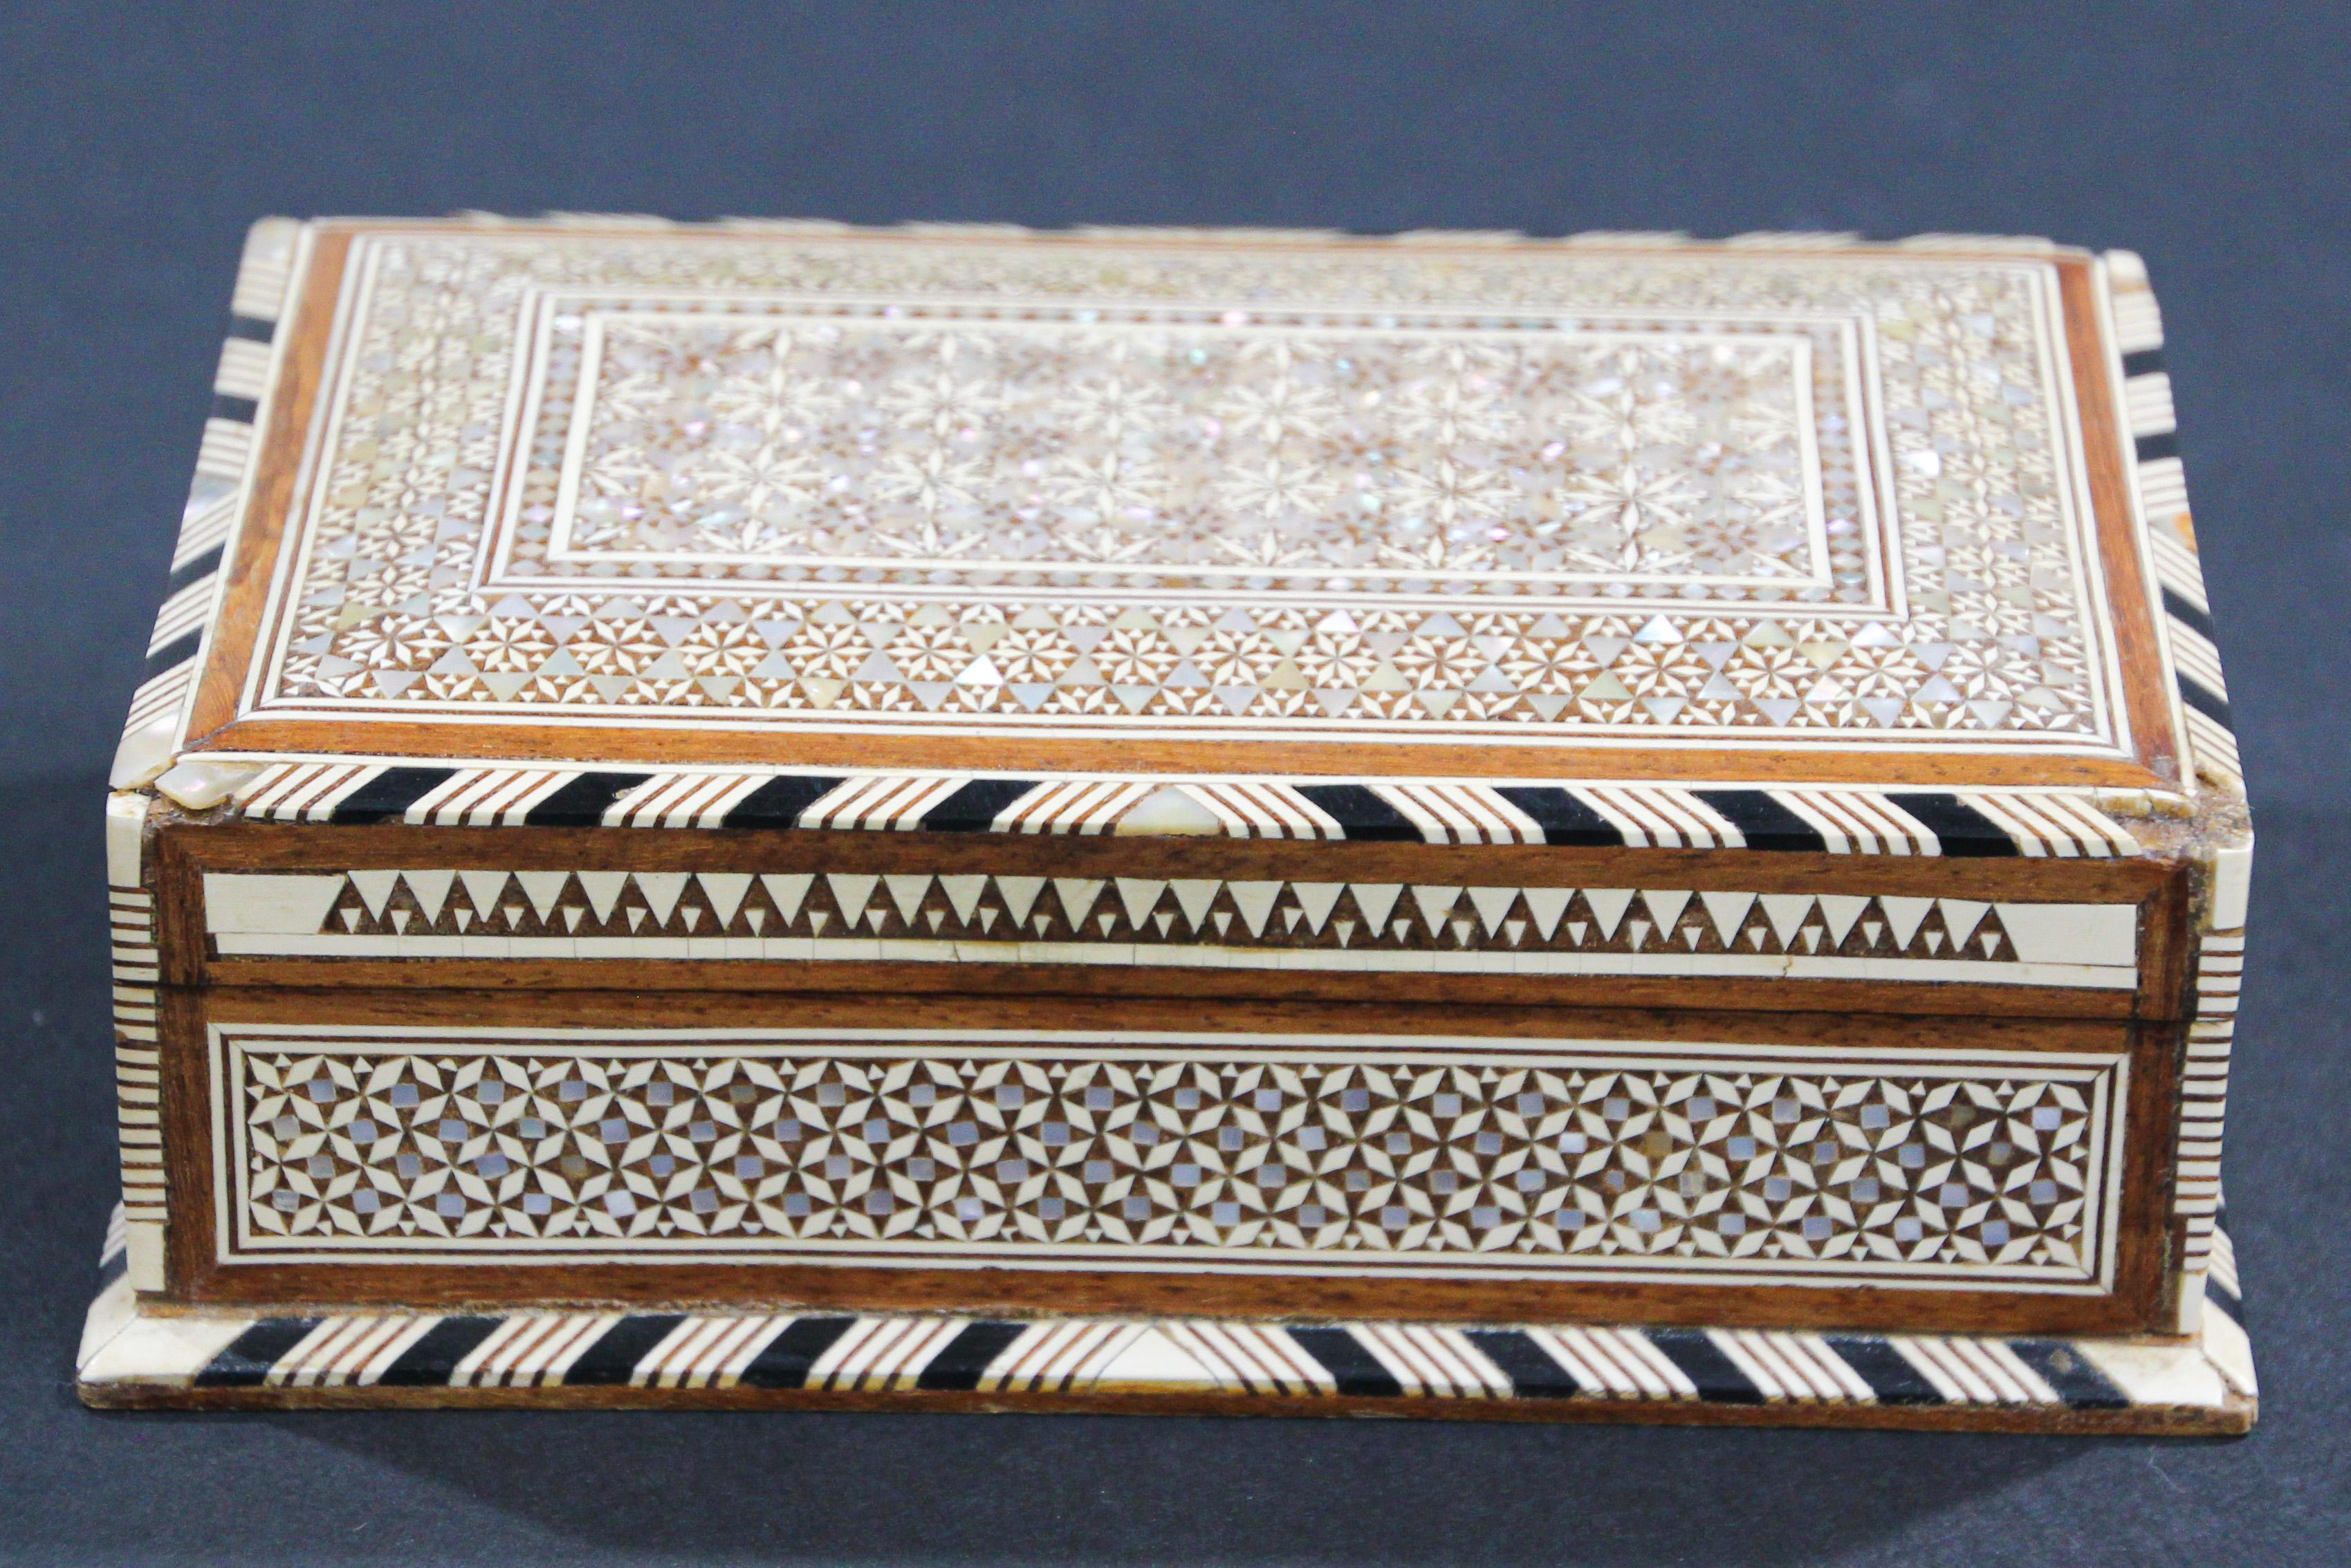 Exquisite handcrafted Middle Eastern mosaic marquetry inlaid walnut wood box.
Large box intricately decorated with Moorish motif designs which have been painstakingly inlaid with mosaic marquetry, mother of pearl and fruitwoods.
Middle Eastern,